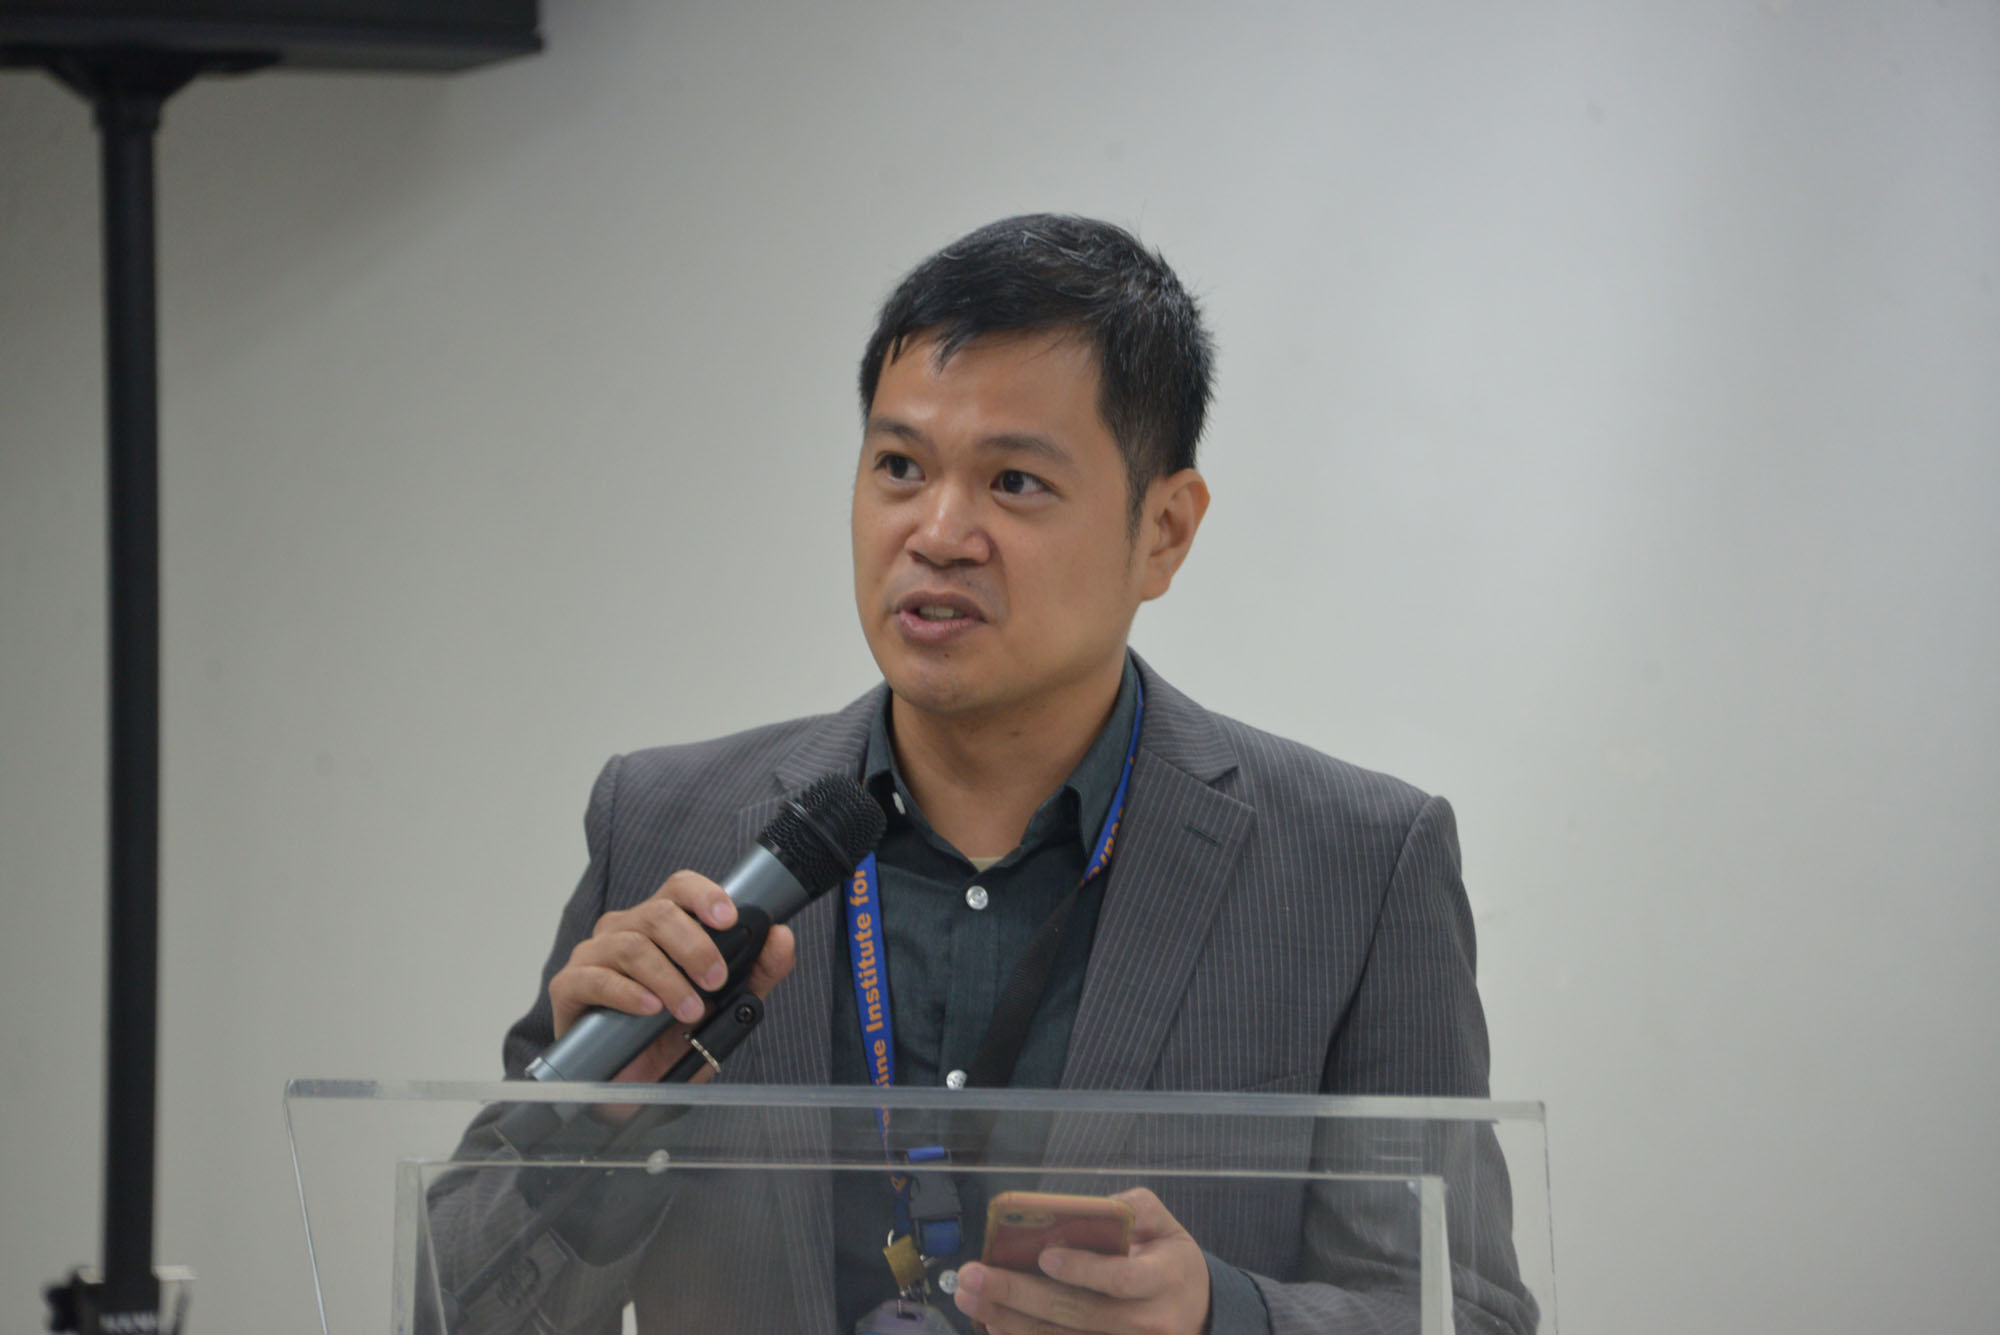 The Global Economic Environment: A Symposium on the Global Economy and What it Means for the Philippines-pids-cier-9-20190493.jpg